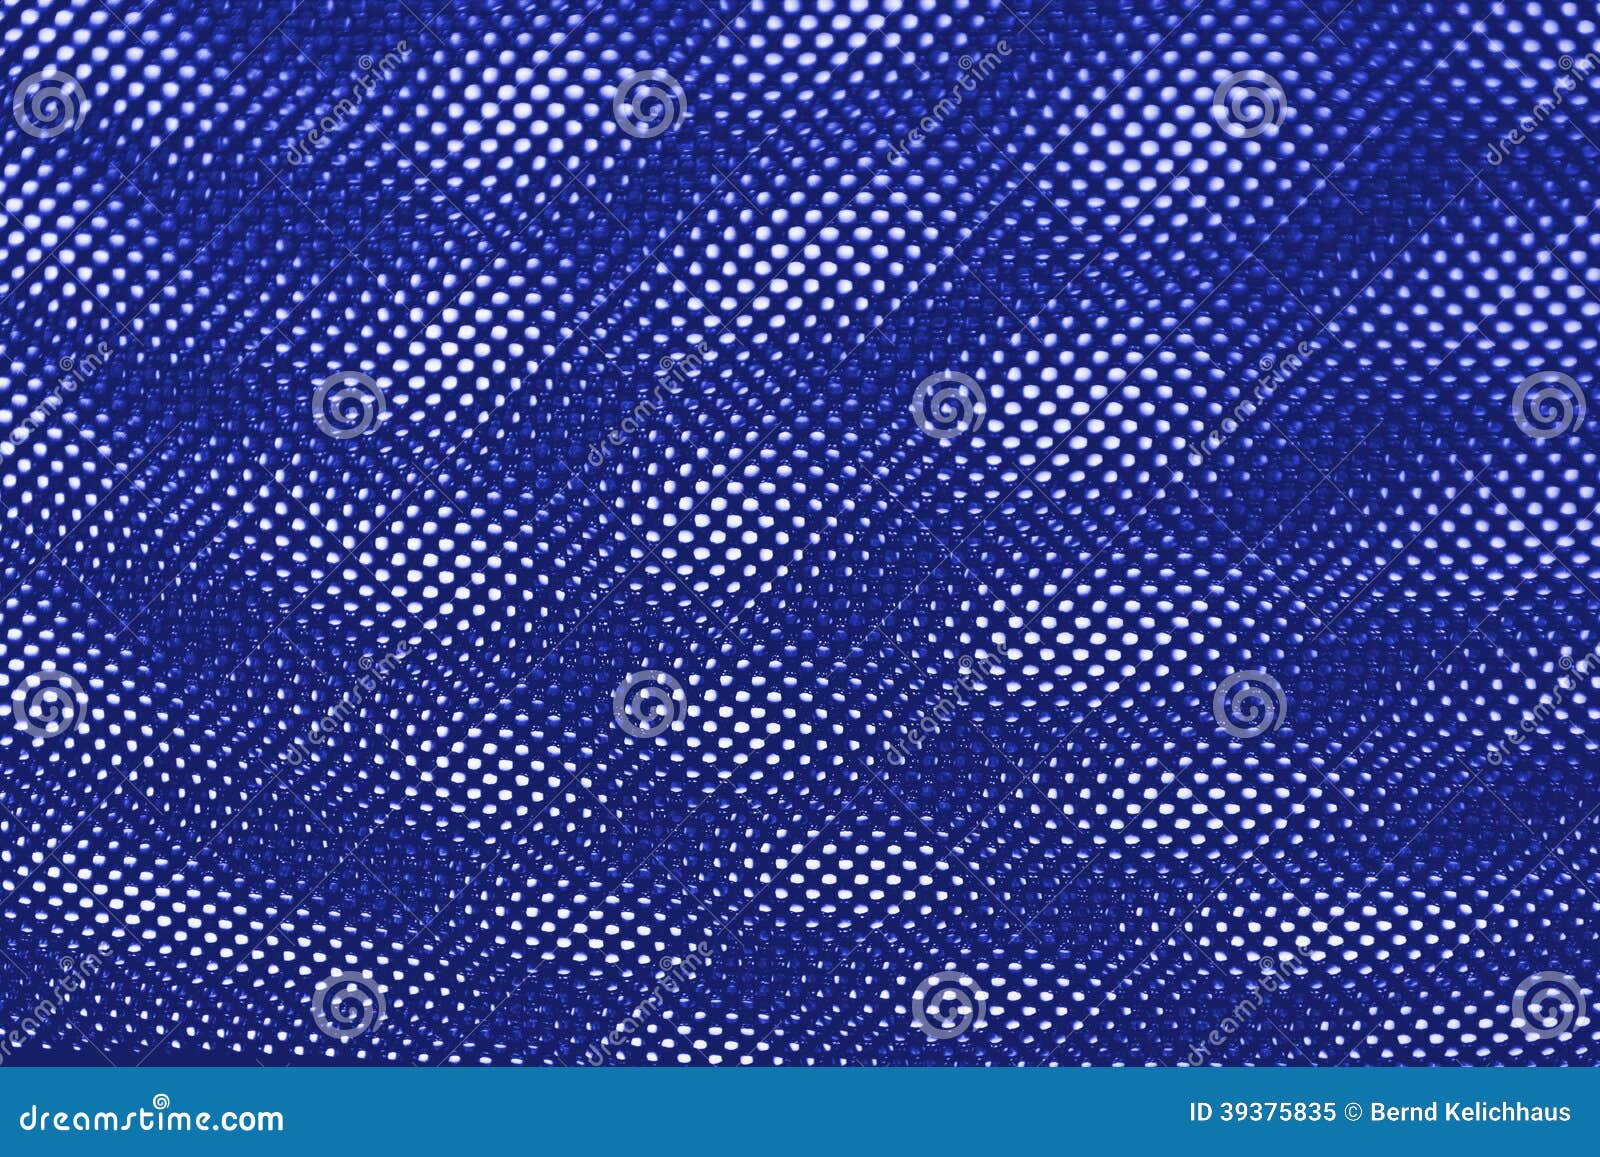 Textile background stock image. Image of fabric, textured - 39375835